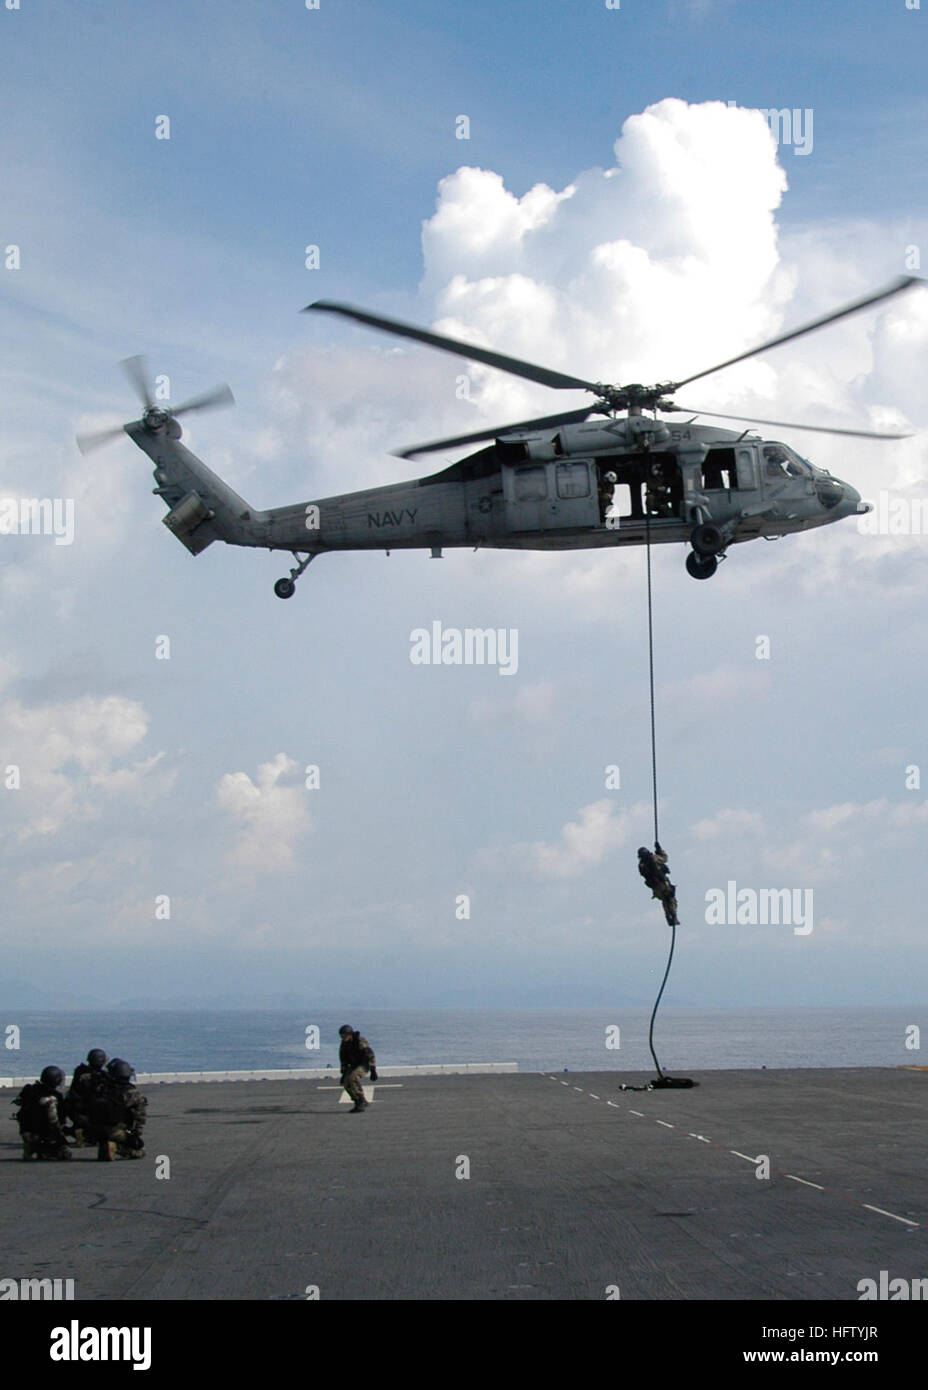 070902-N-3666S-087 Off the Coast of Panama (Sep. 2, 2007) French boarding teams rappel out of a U.S. Navy SH-60 Helicopter onto the flight deck of the Multipurpose Amphibious Assault Ship USS WASP (LHD 1). Wasp is in Panama as part of the multi-national exercise PANAMAX 2007. Civil and military forces from 19 countries are participating in PANAMAX, a U.S. Southern Command joint and multi-national training exercise co-sponsored with the Government of Panama, in the waters off the coast of Panama in Honduras. U.S. Navy photo by Mass Communication Specialist 3rd Class Robbie Stirrup (RELEASED) US Stock Photo